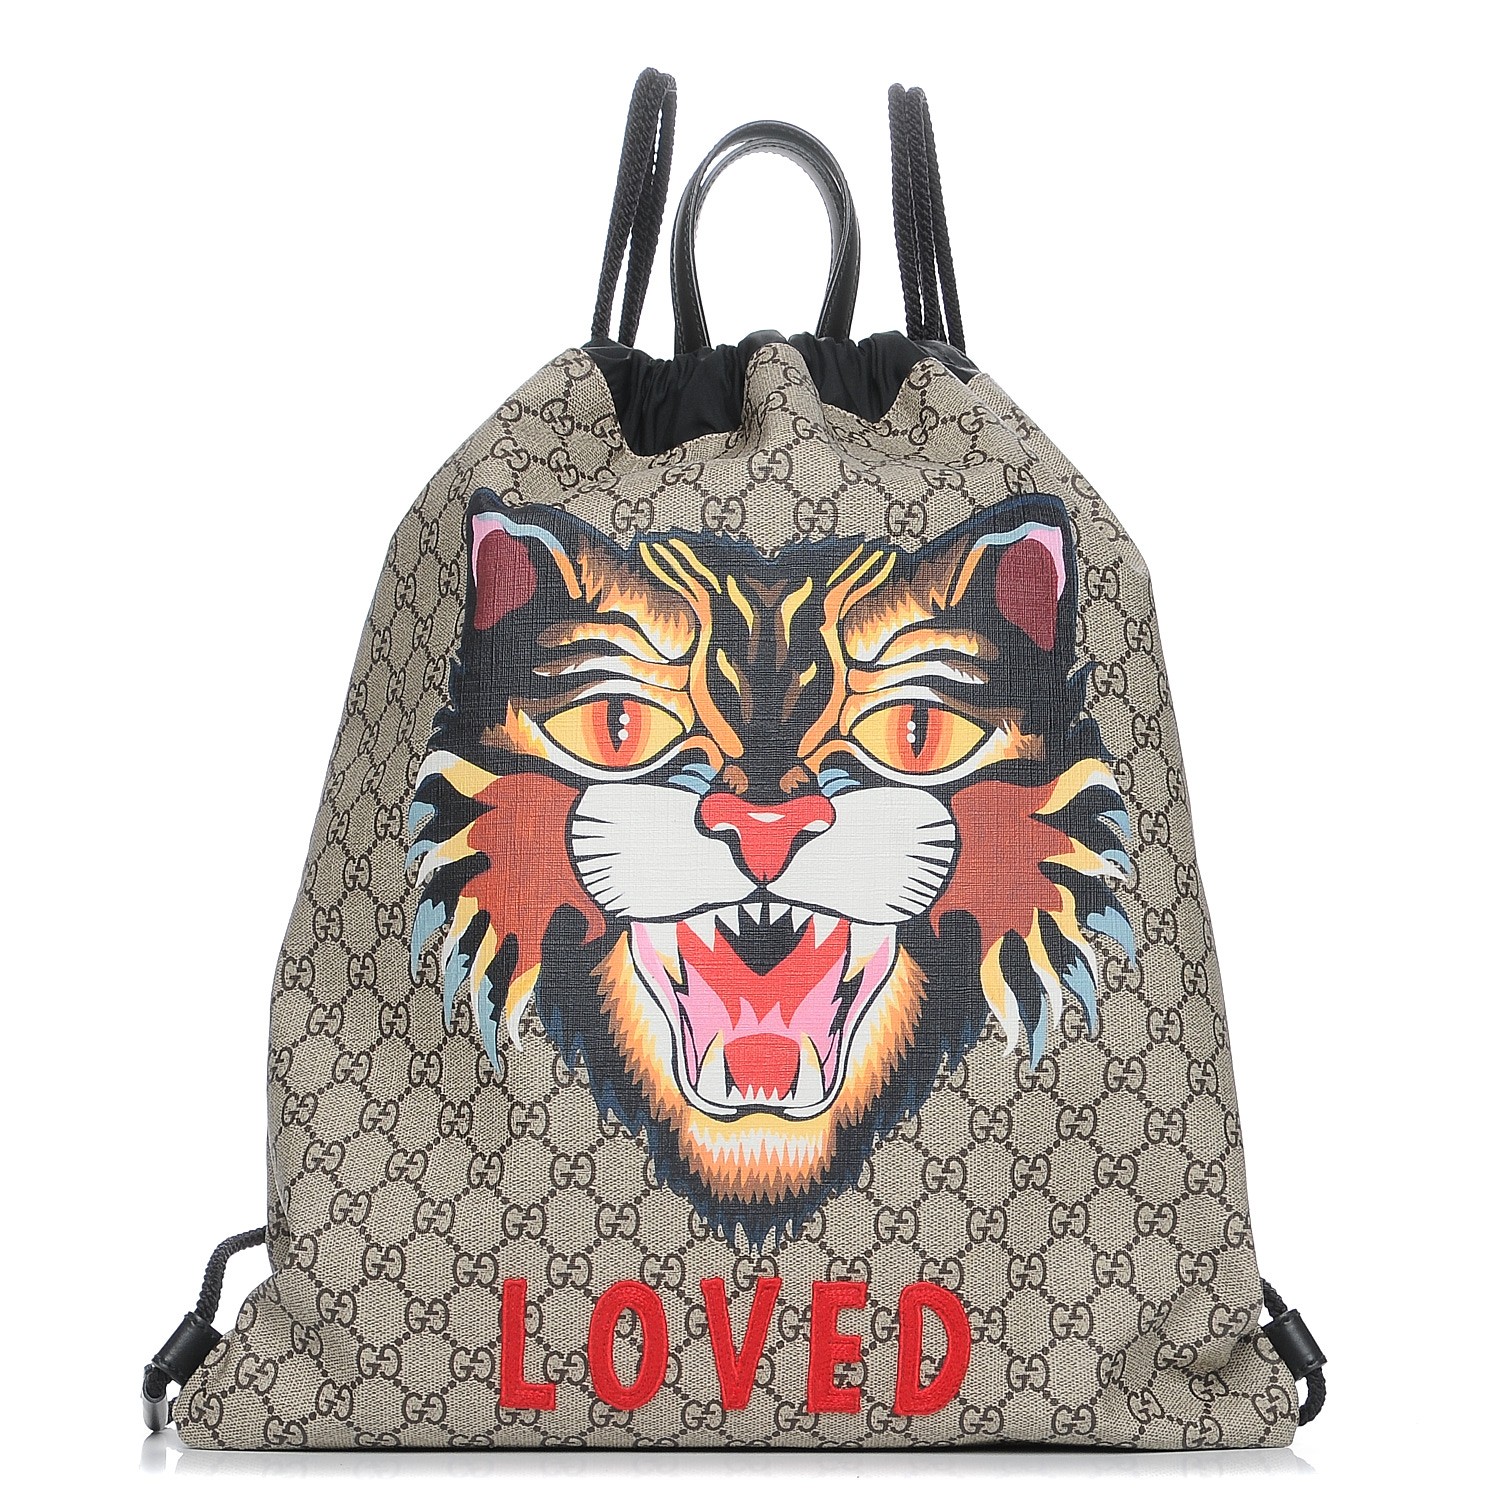 gucci backpack with cat